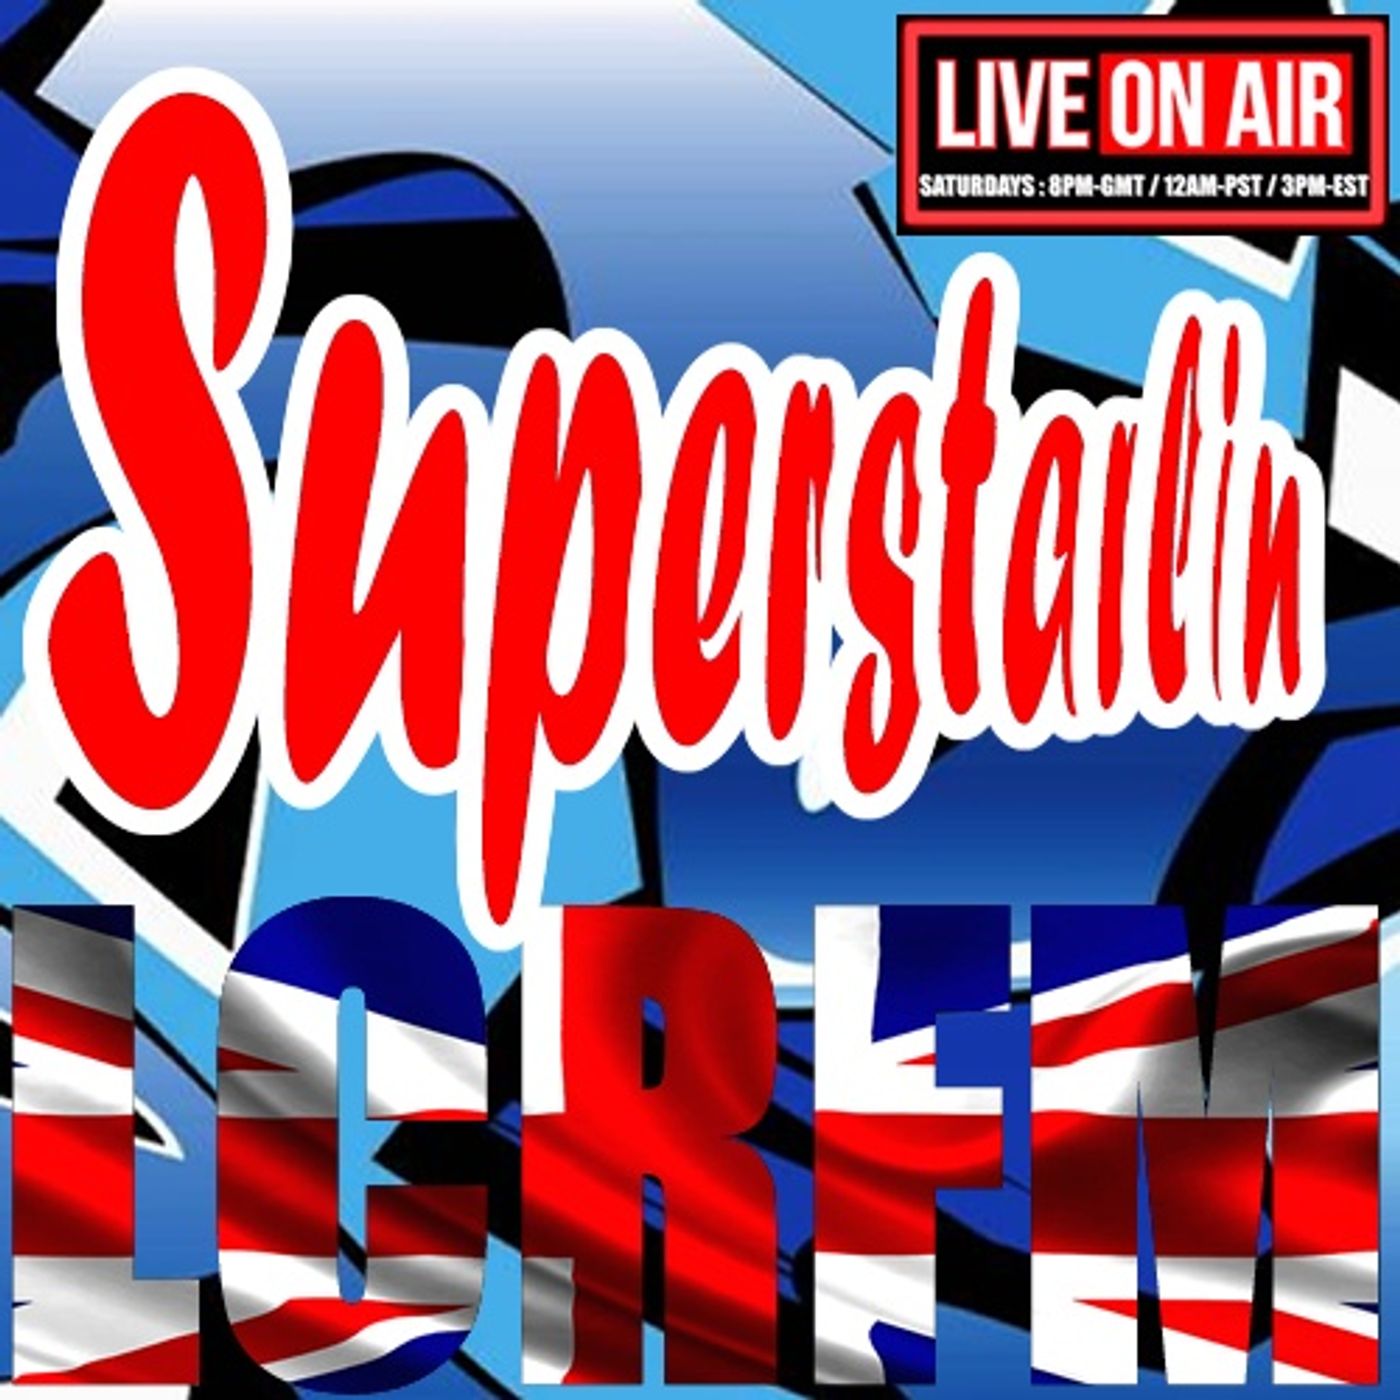 "SUPERSTARLIN" is BACK... Tomorrow Feb 19 ... 2HRS OF GREAT MUSIC... @8PM-GMT... ON LCRFM NET